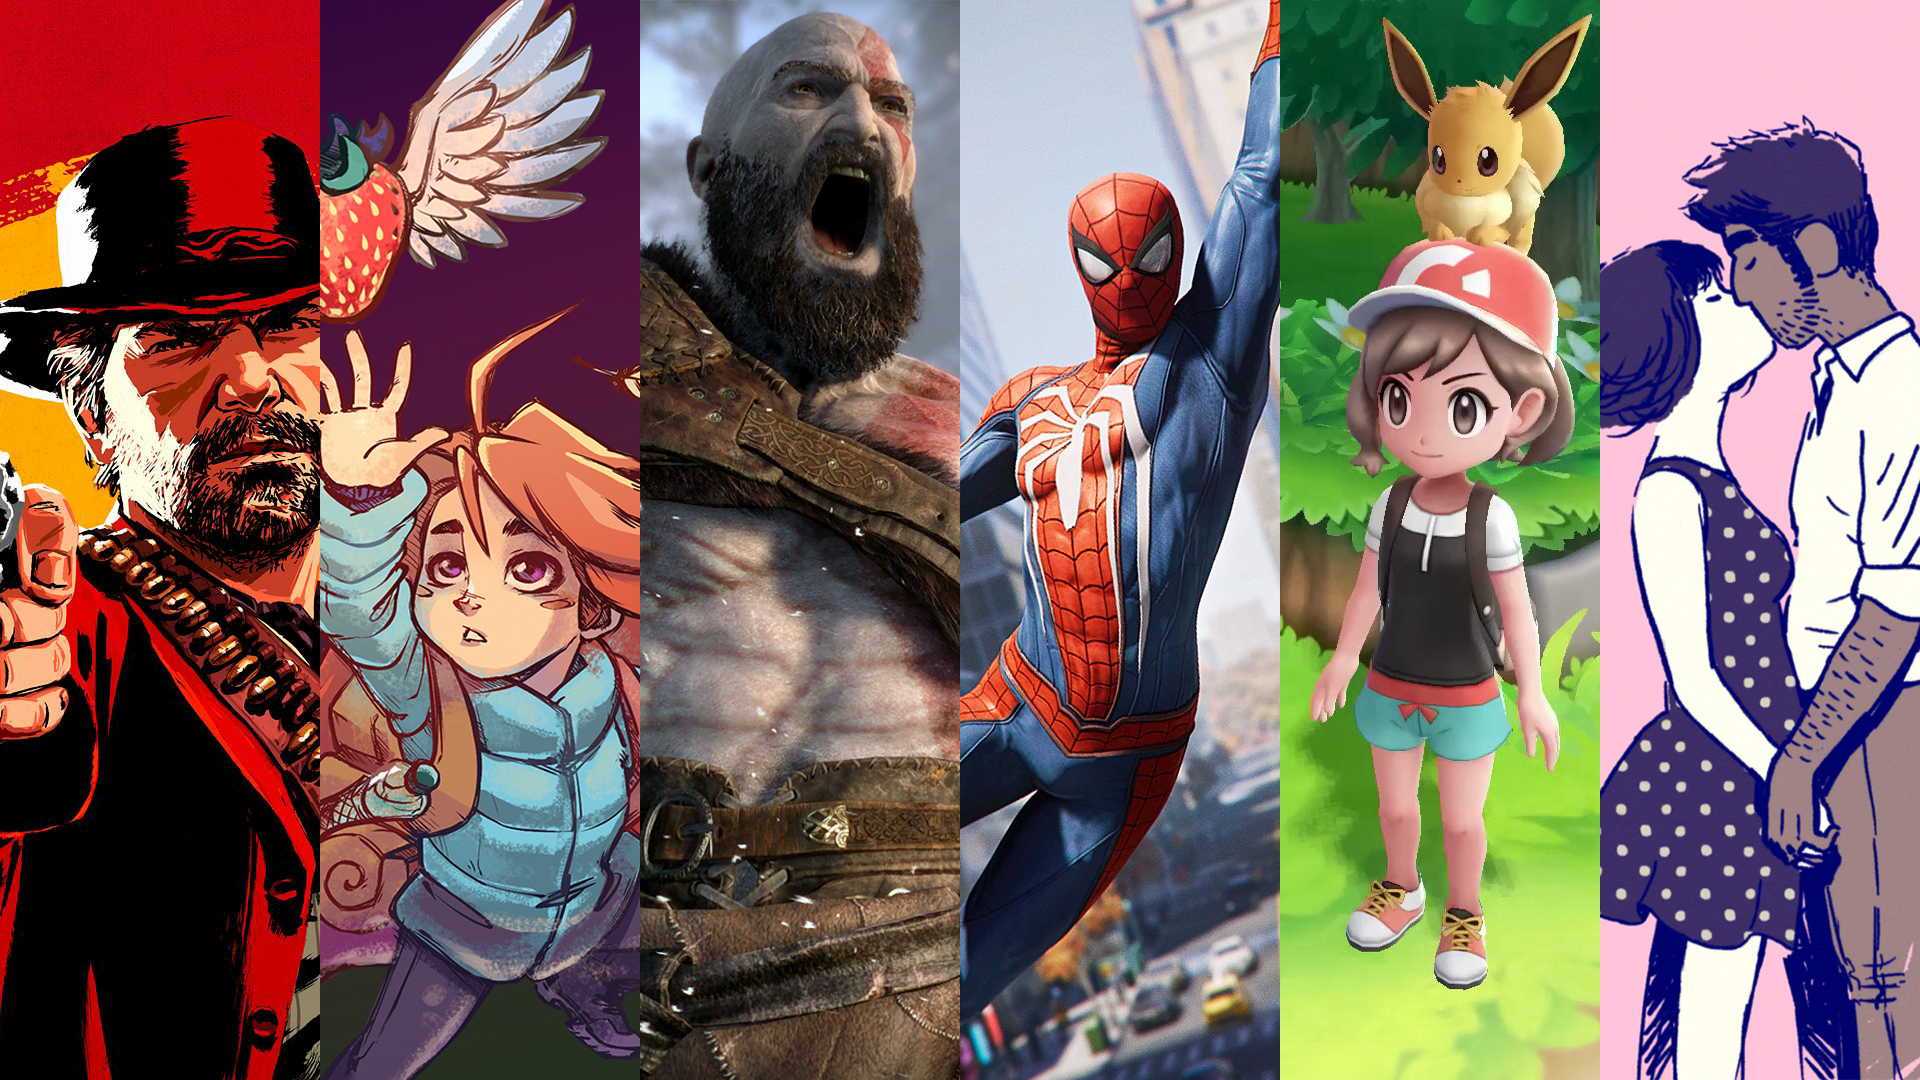 2018 was one of the best year for gaming! Still can't get over it has  become 5 years : r/gaming